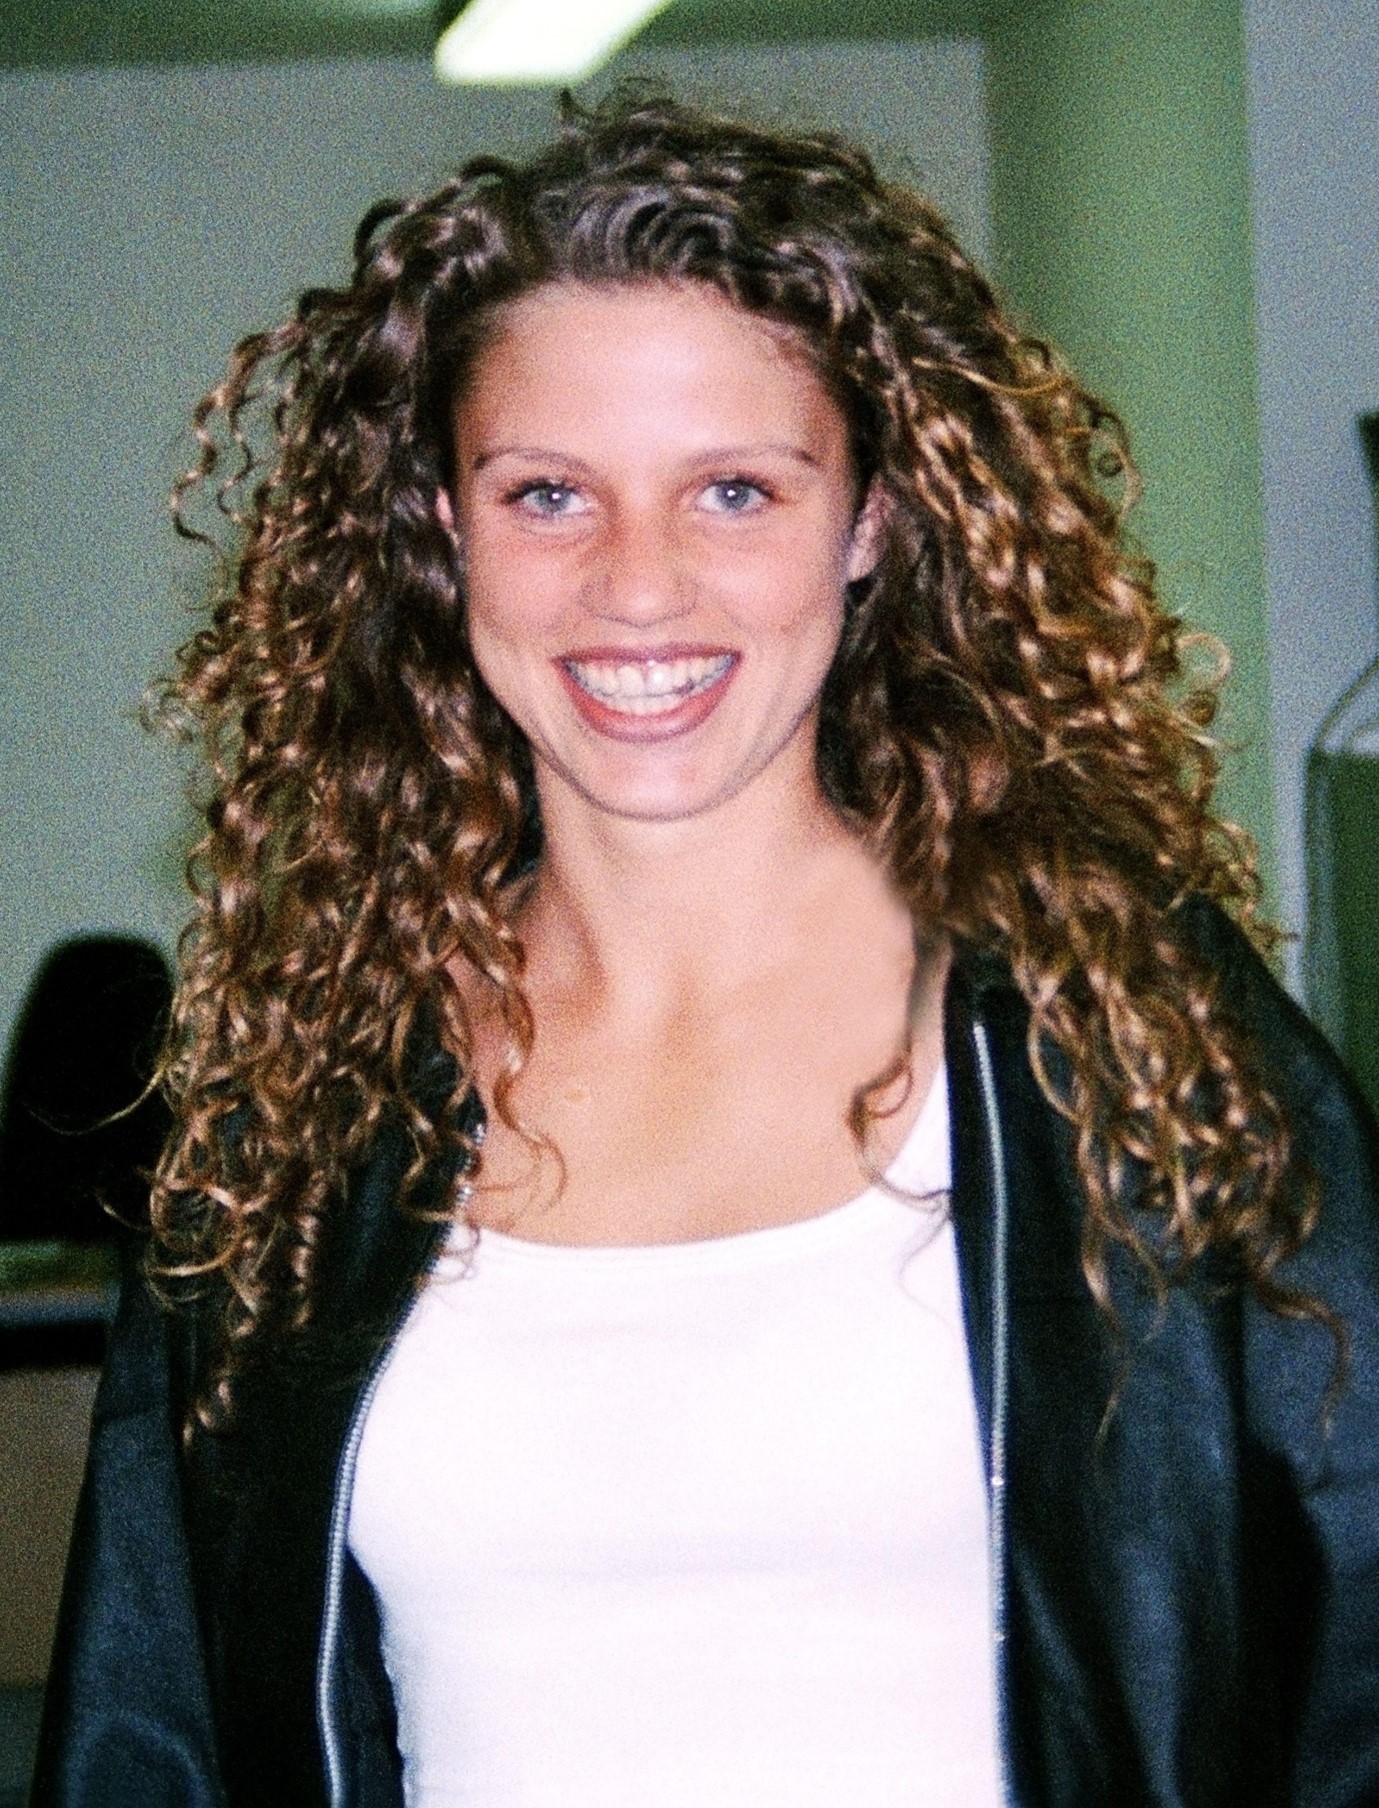 Katie Price Before Surgery: The star at 16 years of age.